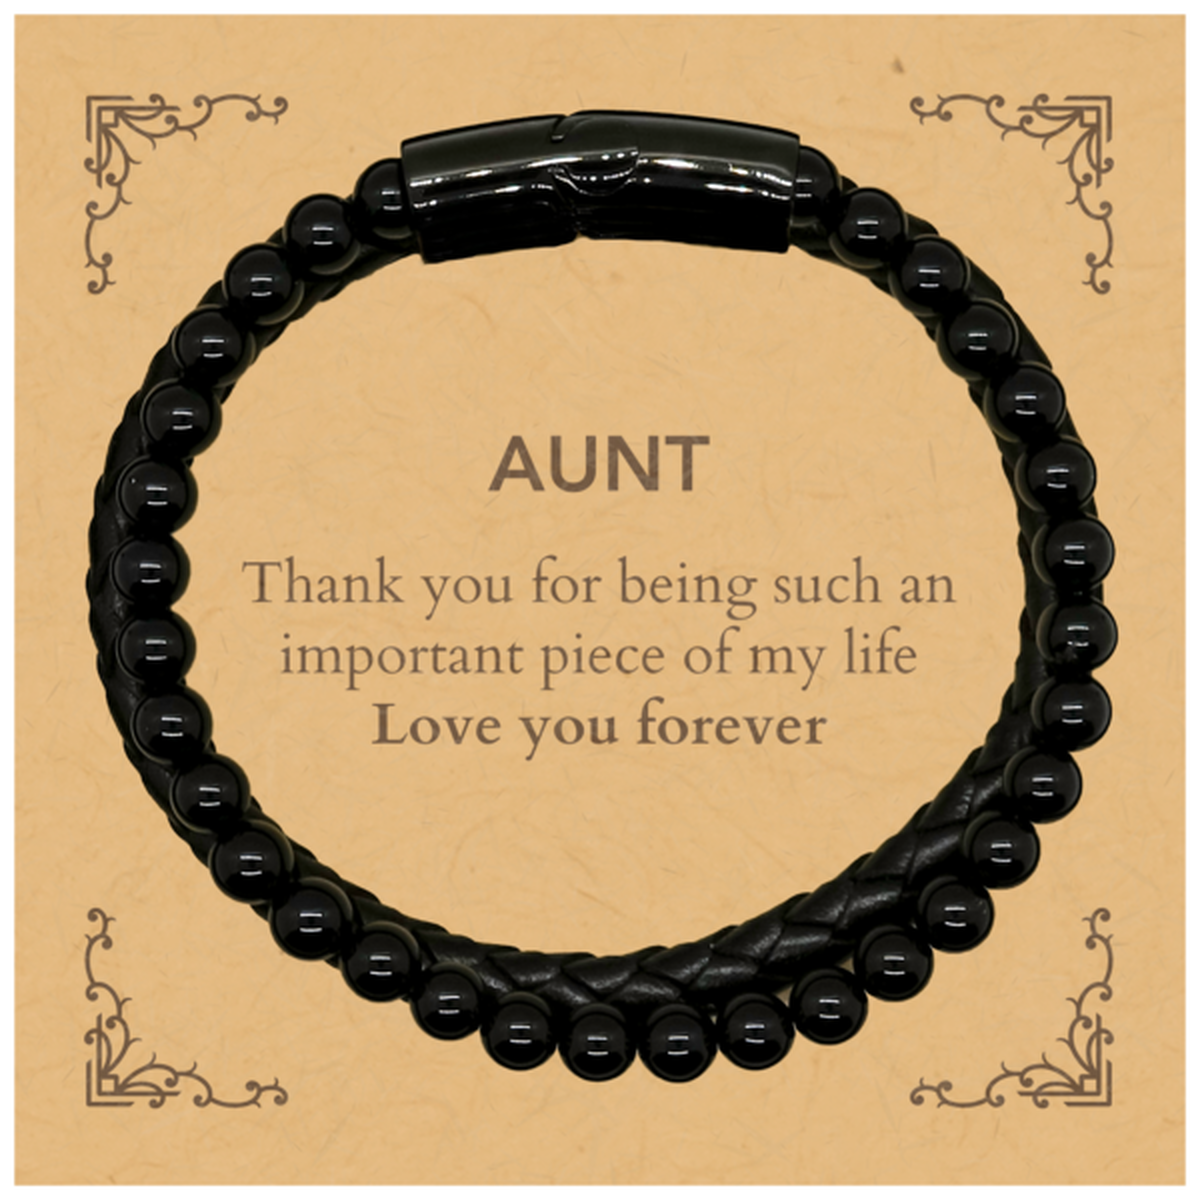 Appropriate Aunt Stone Leather Bracelets Epic Birthday Gifts for Aunt Thank you for being such an important piece of my life Aunt Christmas Mothers Fathers Day